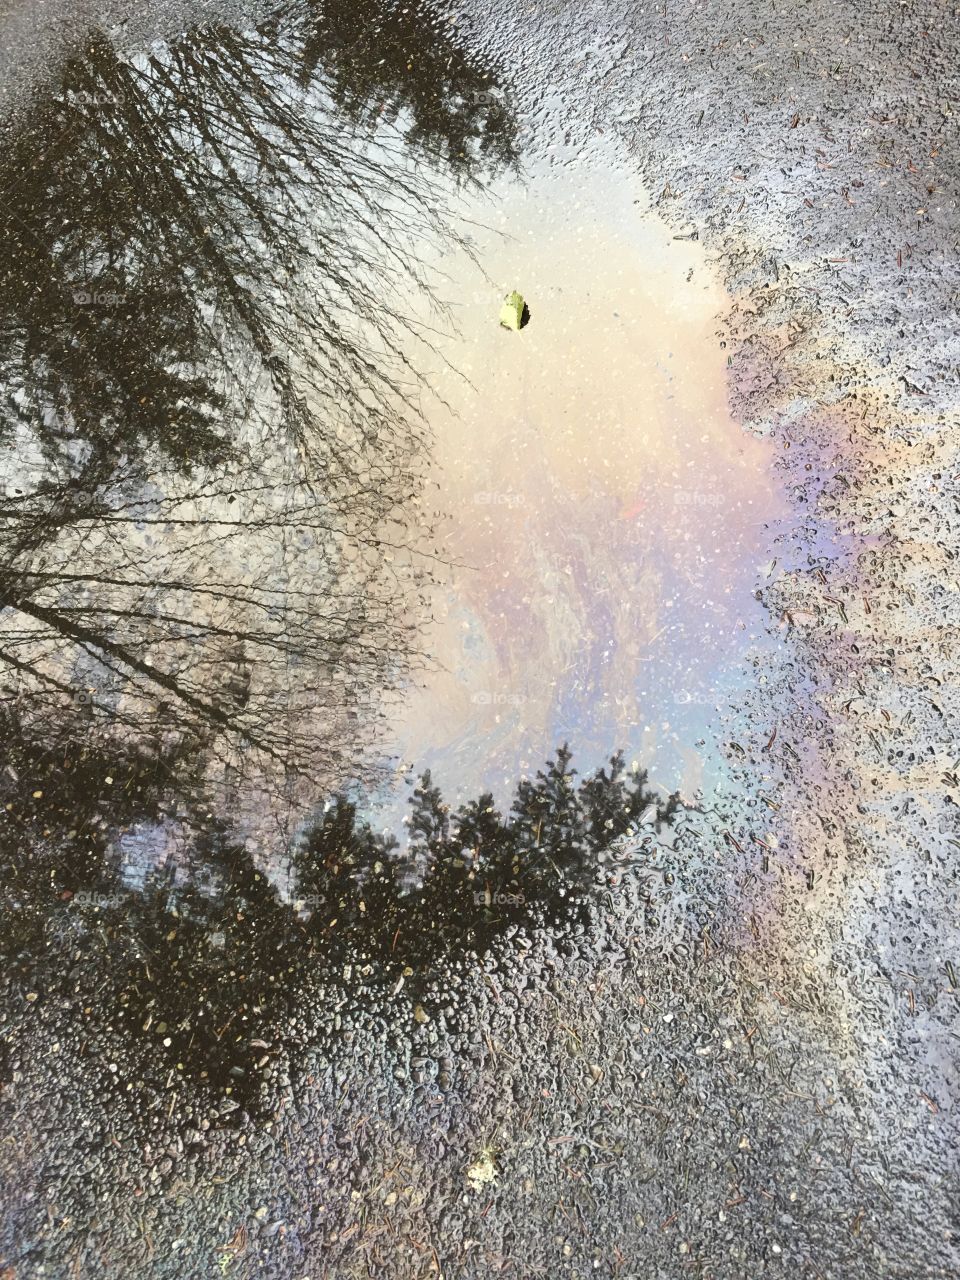 Oil in rain puddle reflection 